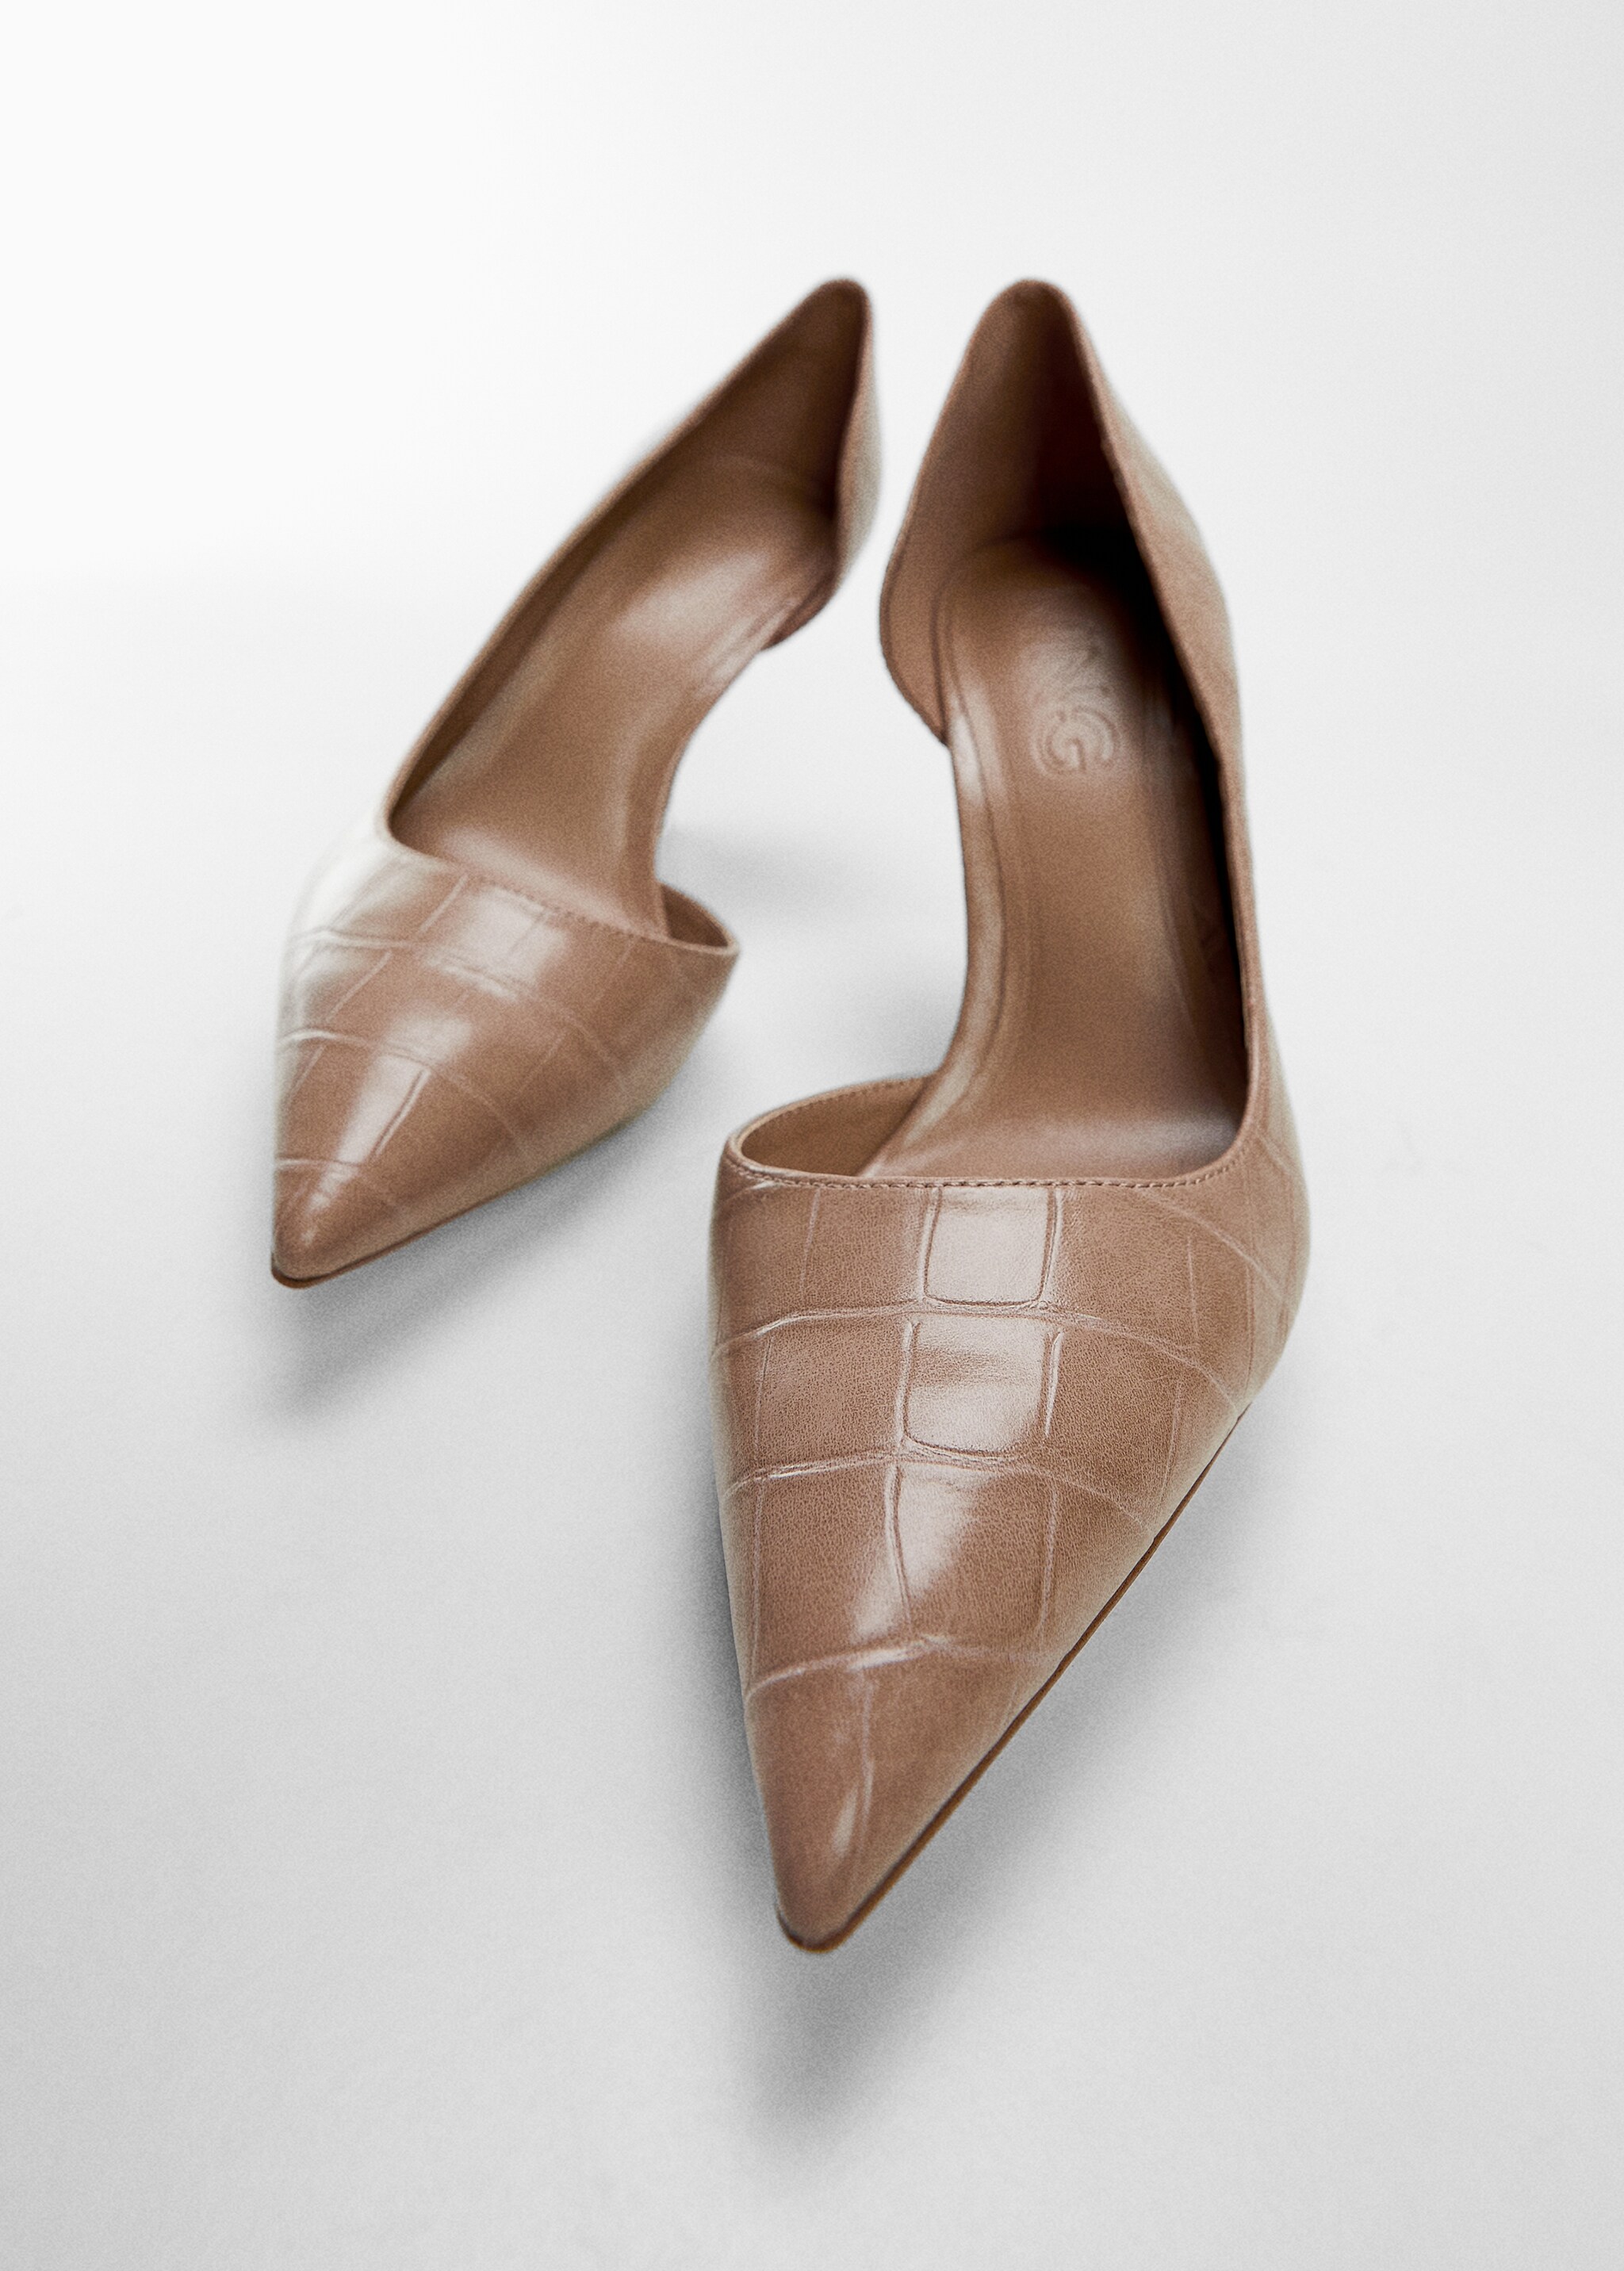 Croc-effect heeled shoes - Details of the article 5